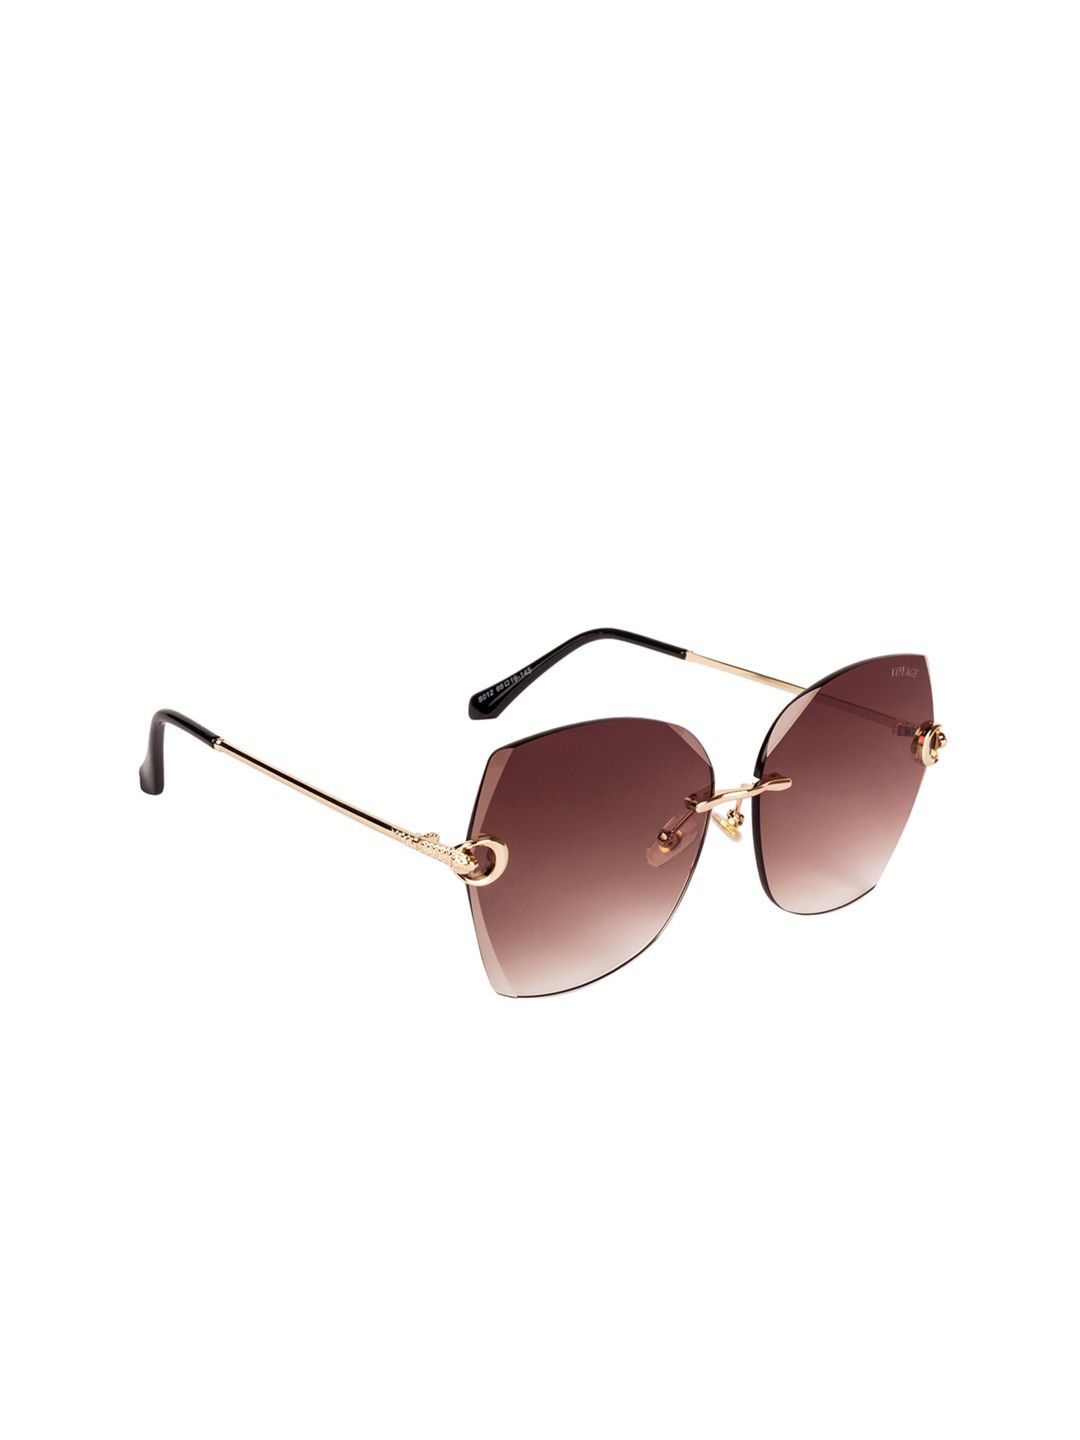 Voyage Women Brown Square Sunglasses S012MG2883 Price in India